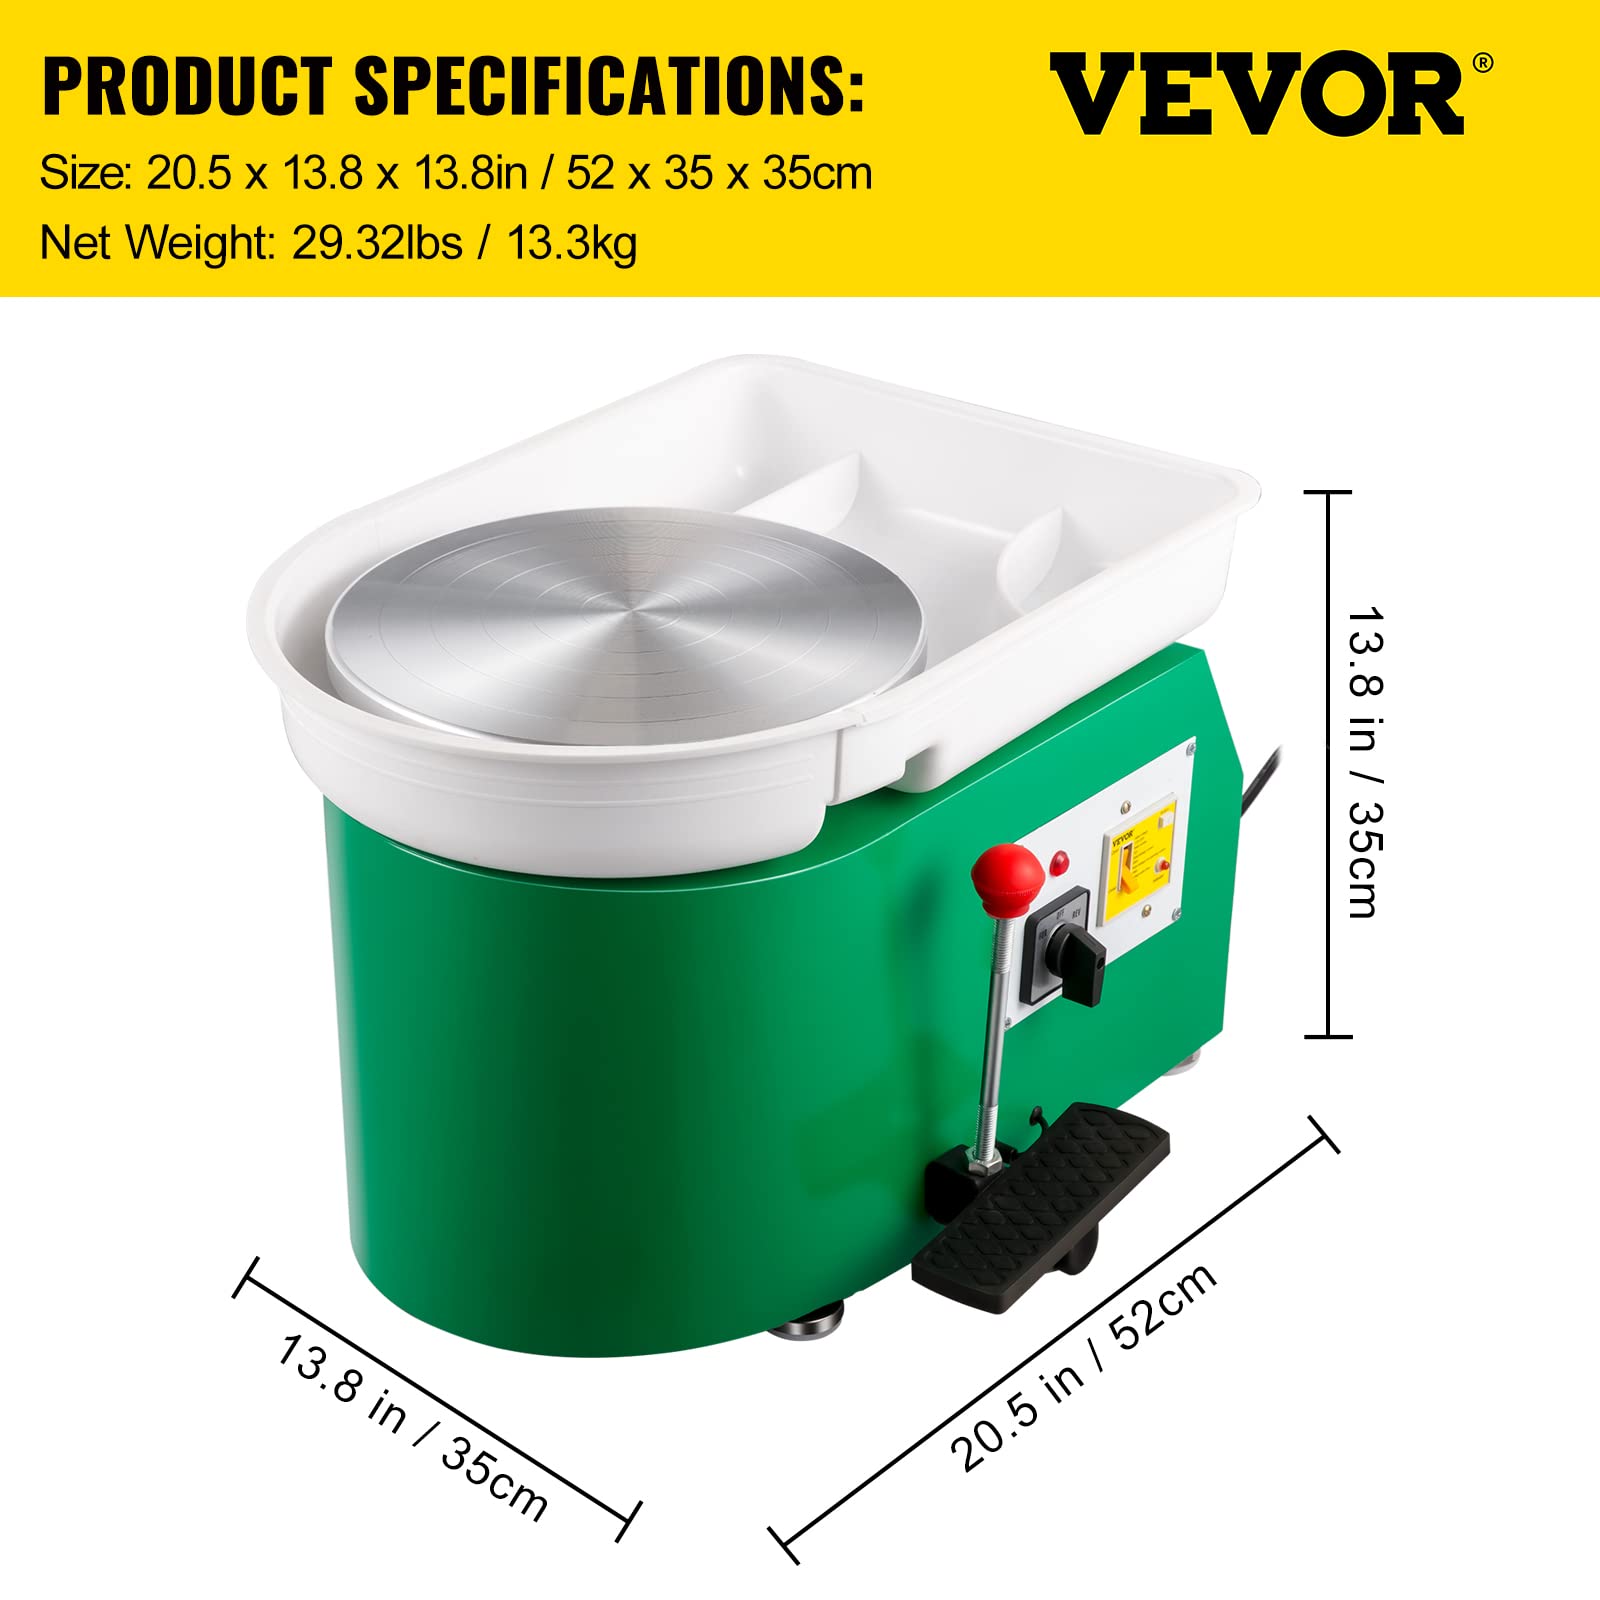 VEVOR Forming Machine Pottery Wheel, Manual & Foot Speed Control, Green 18 Piece